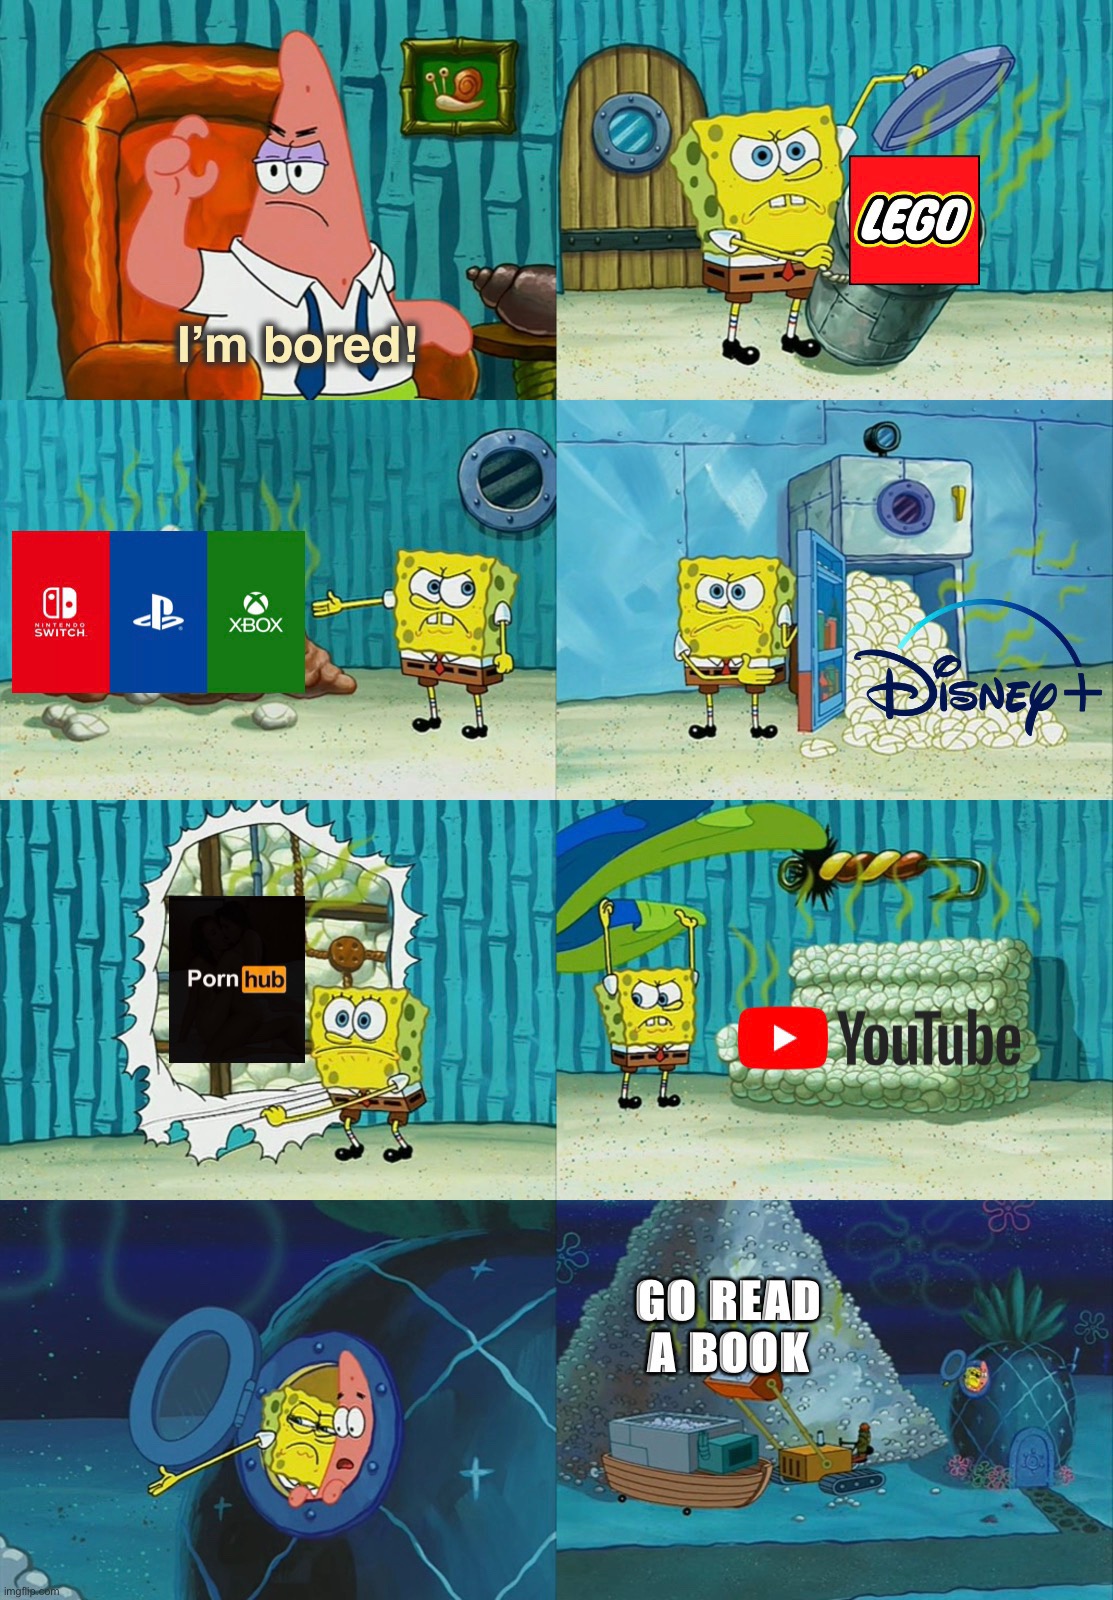 Don’t be bored! | I’m bored! Lego; Video Games; Movies; Porn; YouTube; GO READ A BOOK | image tagged in funny,memes,entertainment,spongebob diapers meme,boredom,fun | made w/ Imgflip meme maker